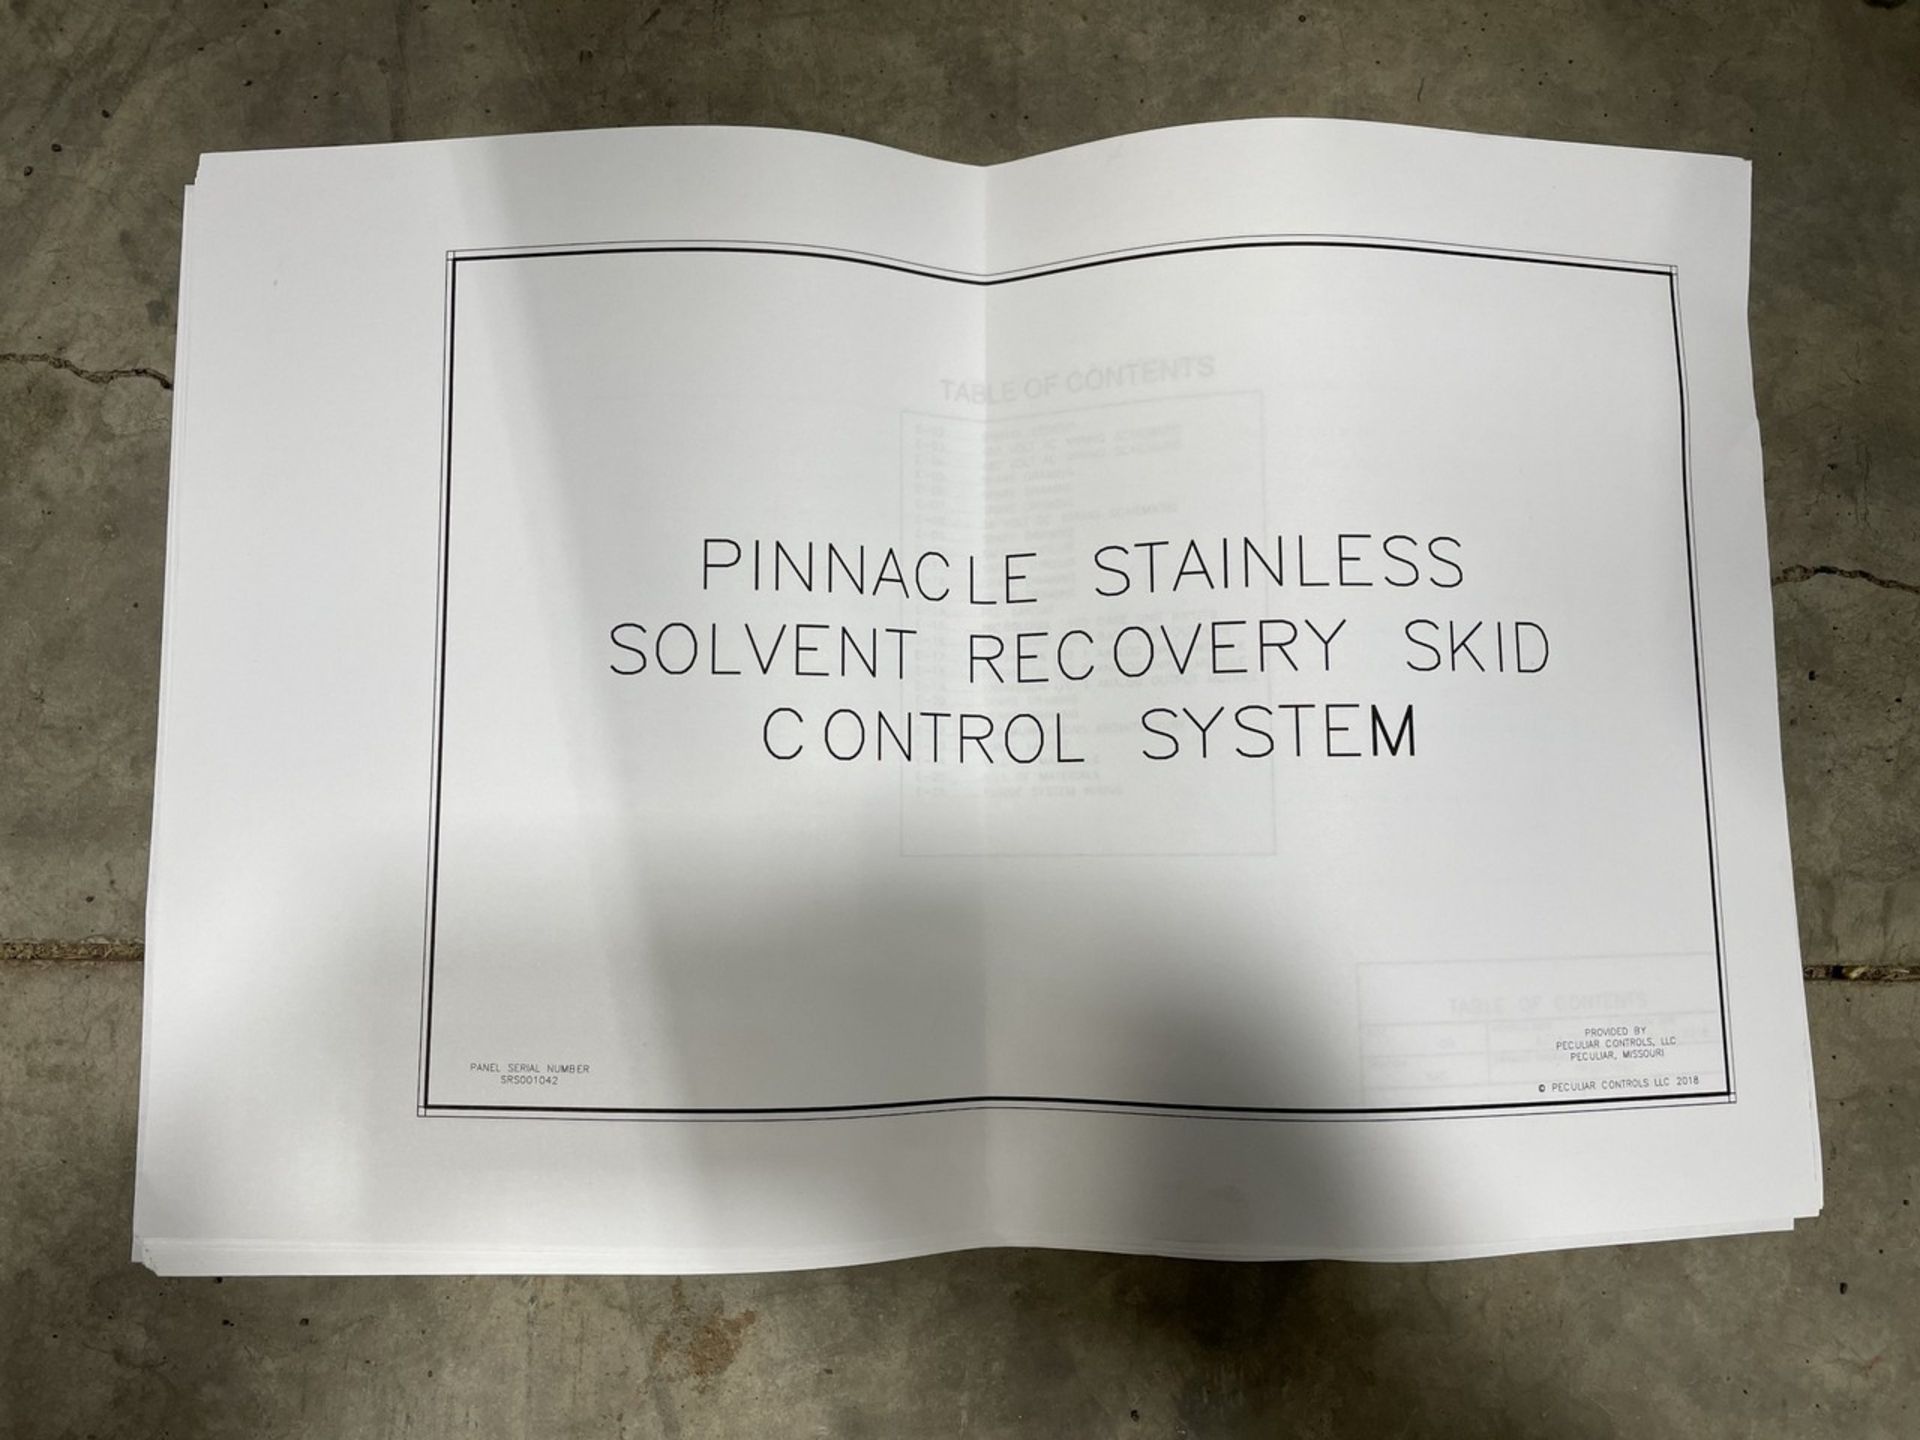 2018 Pinnacle Stainless Solvent Recovery Skid - Image 17 of 21